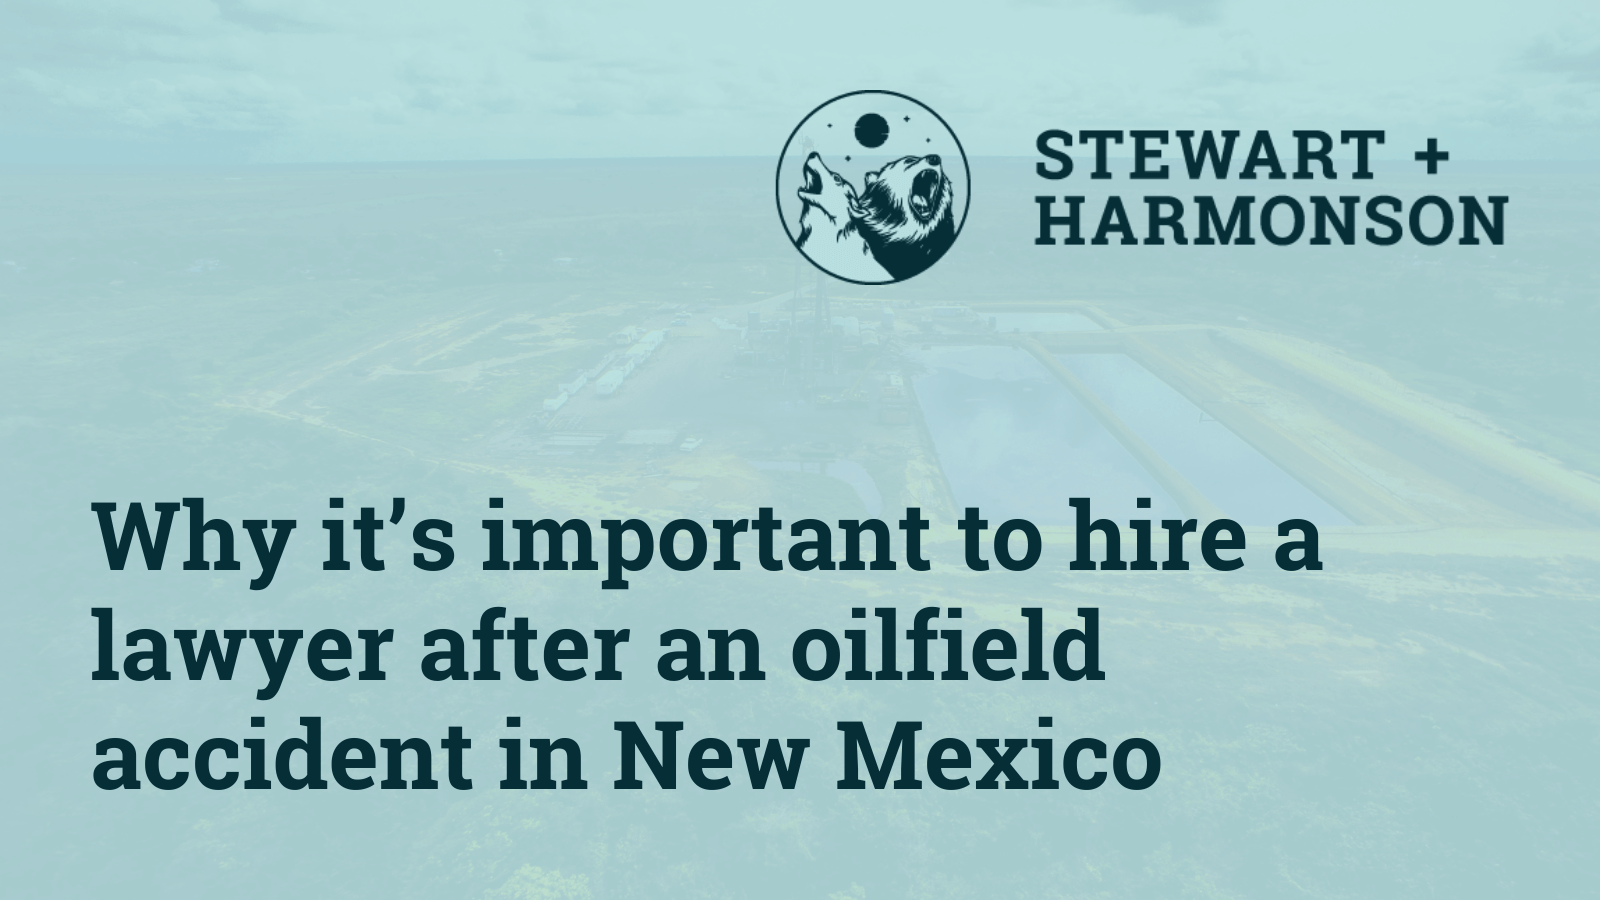 Why it’s important to hire a lawyer after an oilfield accident in New Mexico - Stewart Harmonson Law Firm - New Mexico